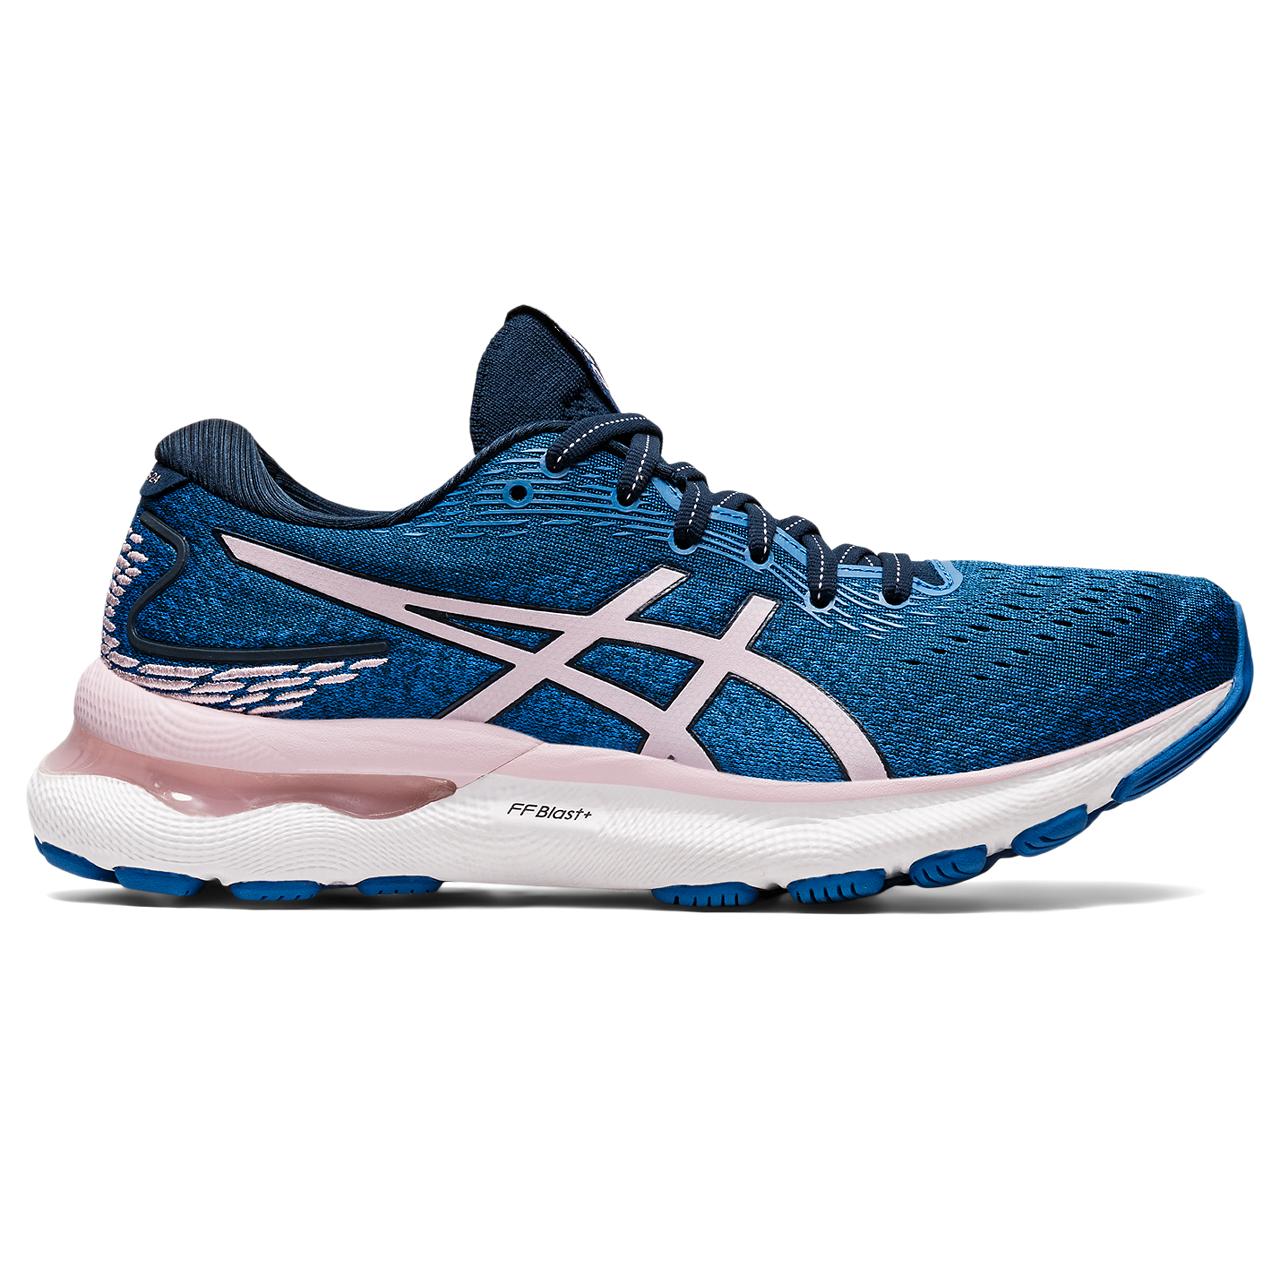 The Women's Nimbus 24 is one of the classics from ASICS.  It's been one of the best-selling cushioned neutral shoes for many years and will no doubt continue that trend with version 24.This version comes in the Wide Fit.  "D"